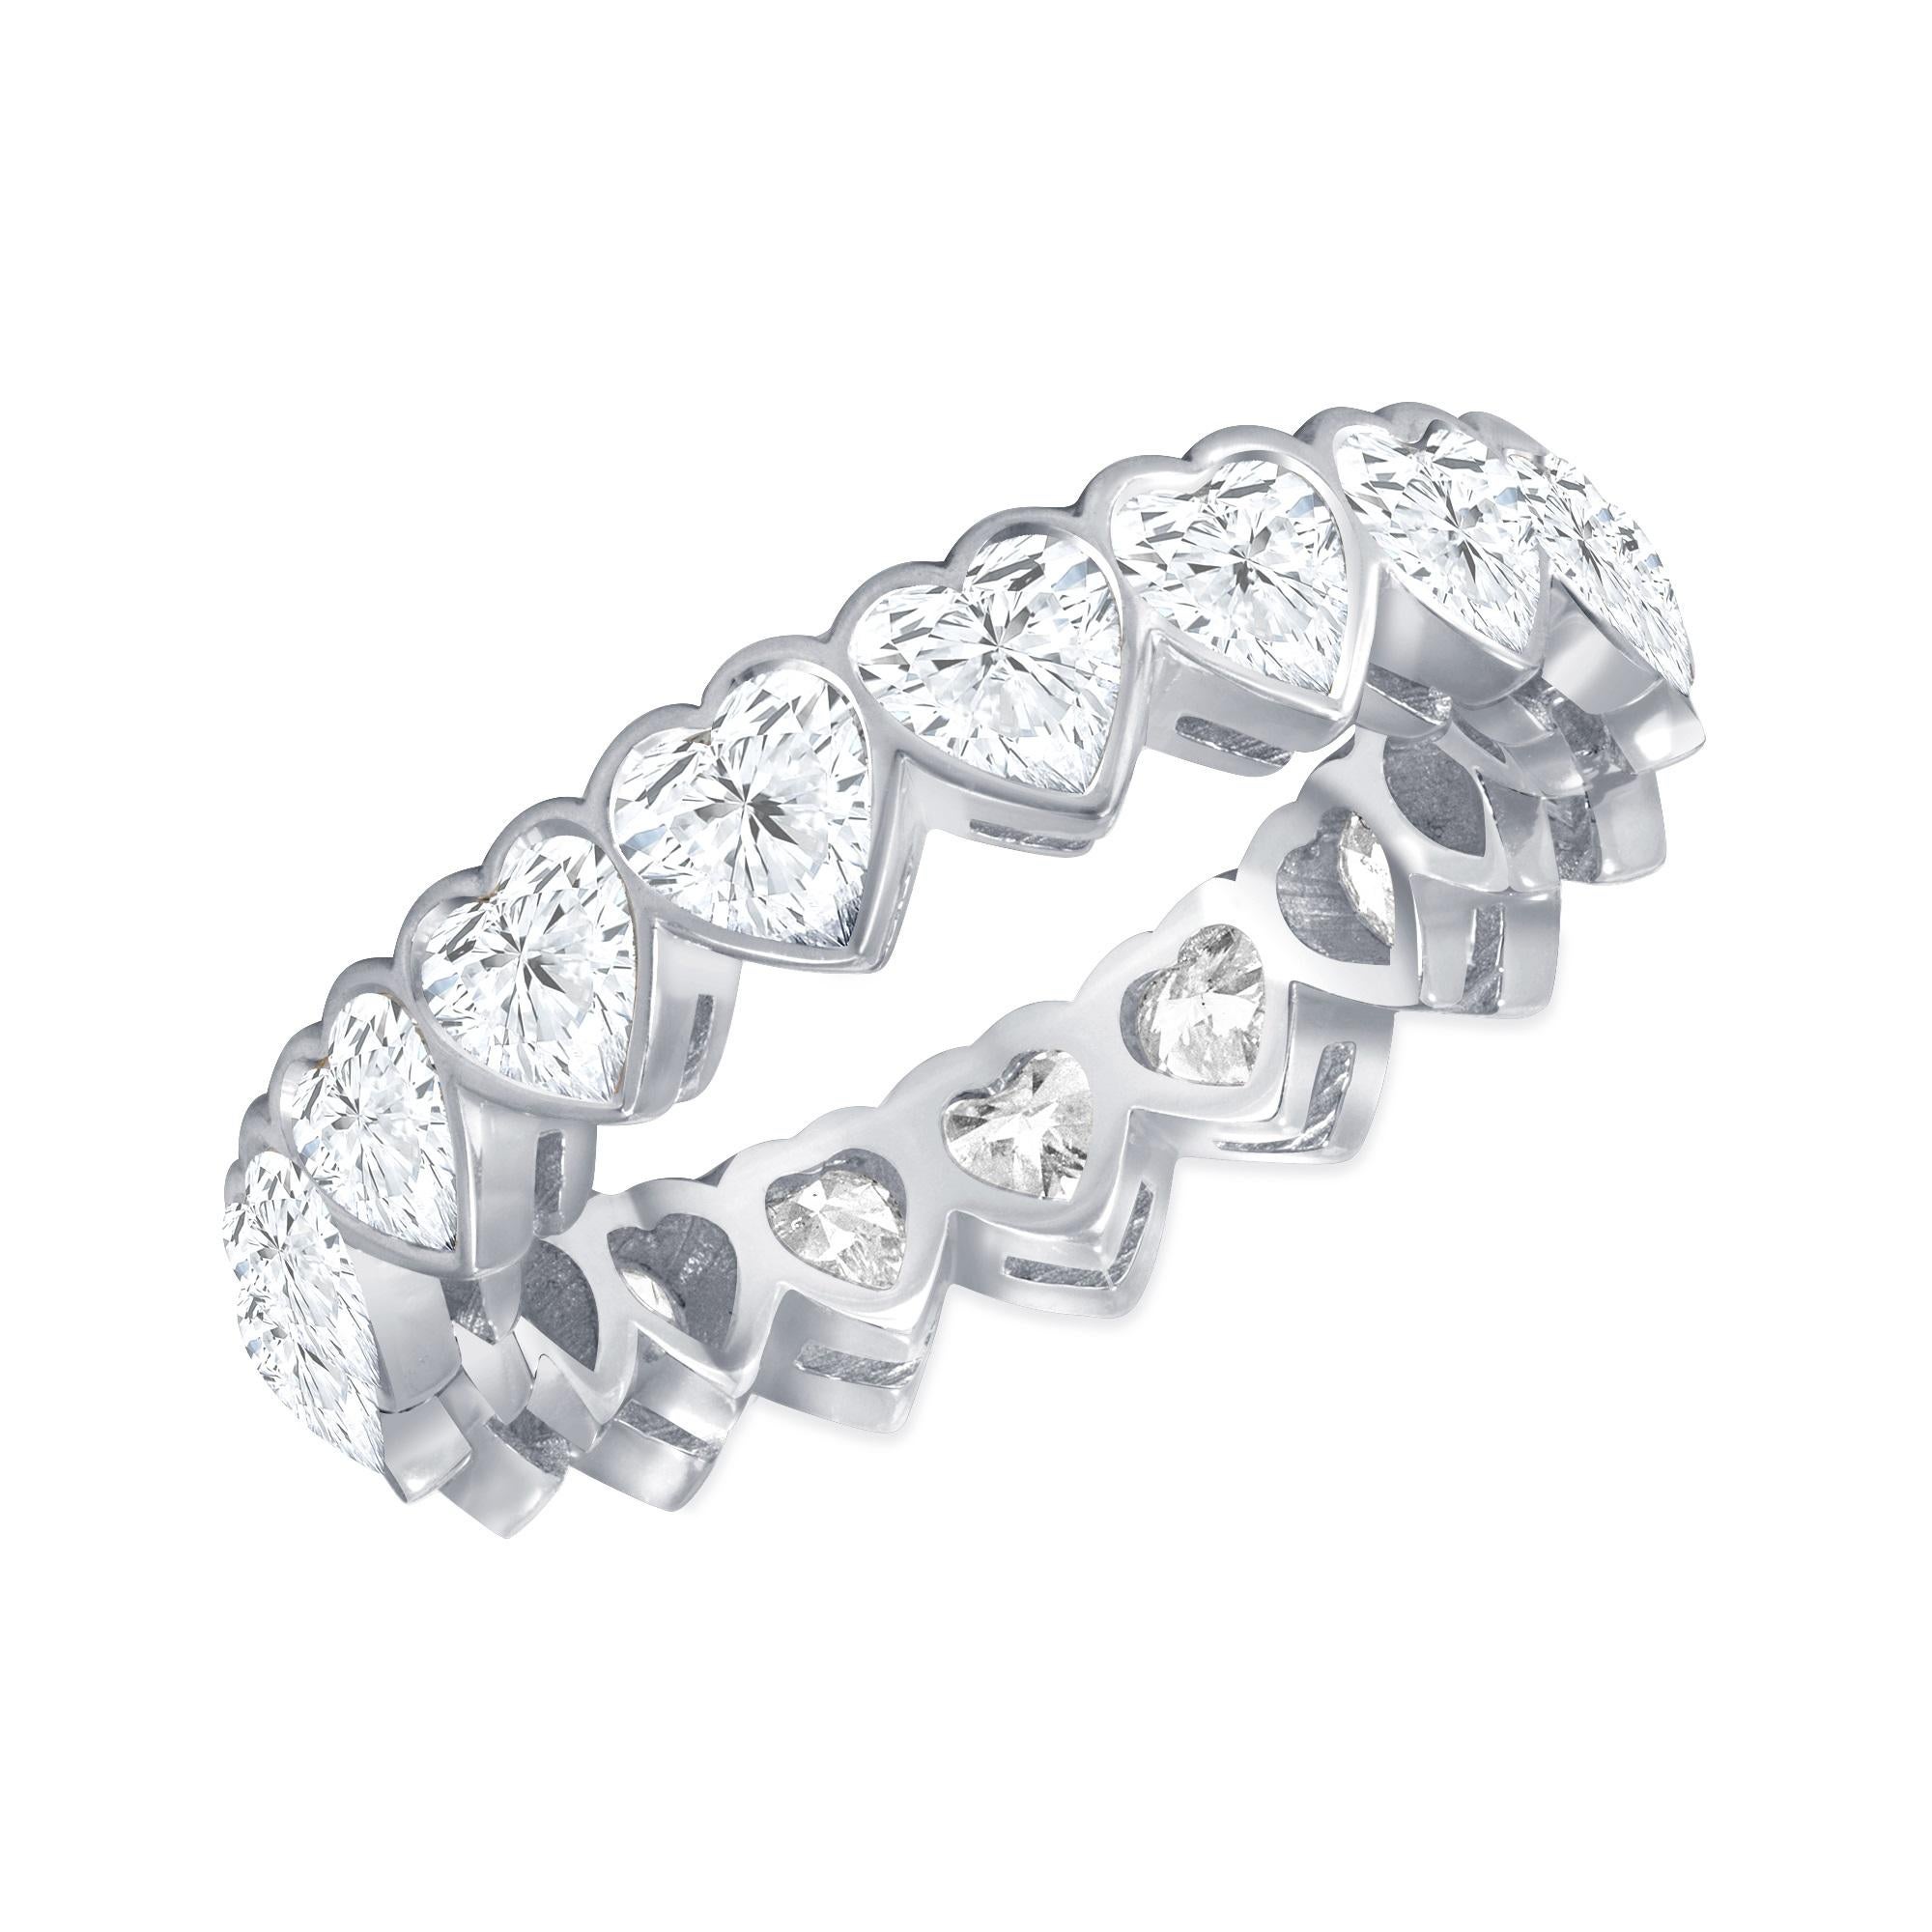 3.40 approx tcw Heart Shaped Natural Diamond Bezel Set Eternity Band Ring 18k Gold

Golden Collection 

This is truly a unique piece due to the many heart shaped diamonds surrounding the 18k gold band. The beautiful gold band perfectly compliments